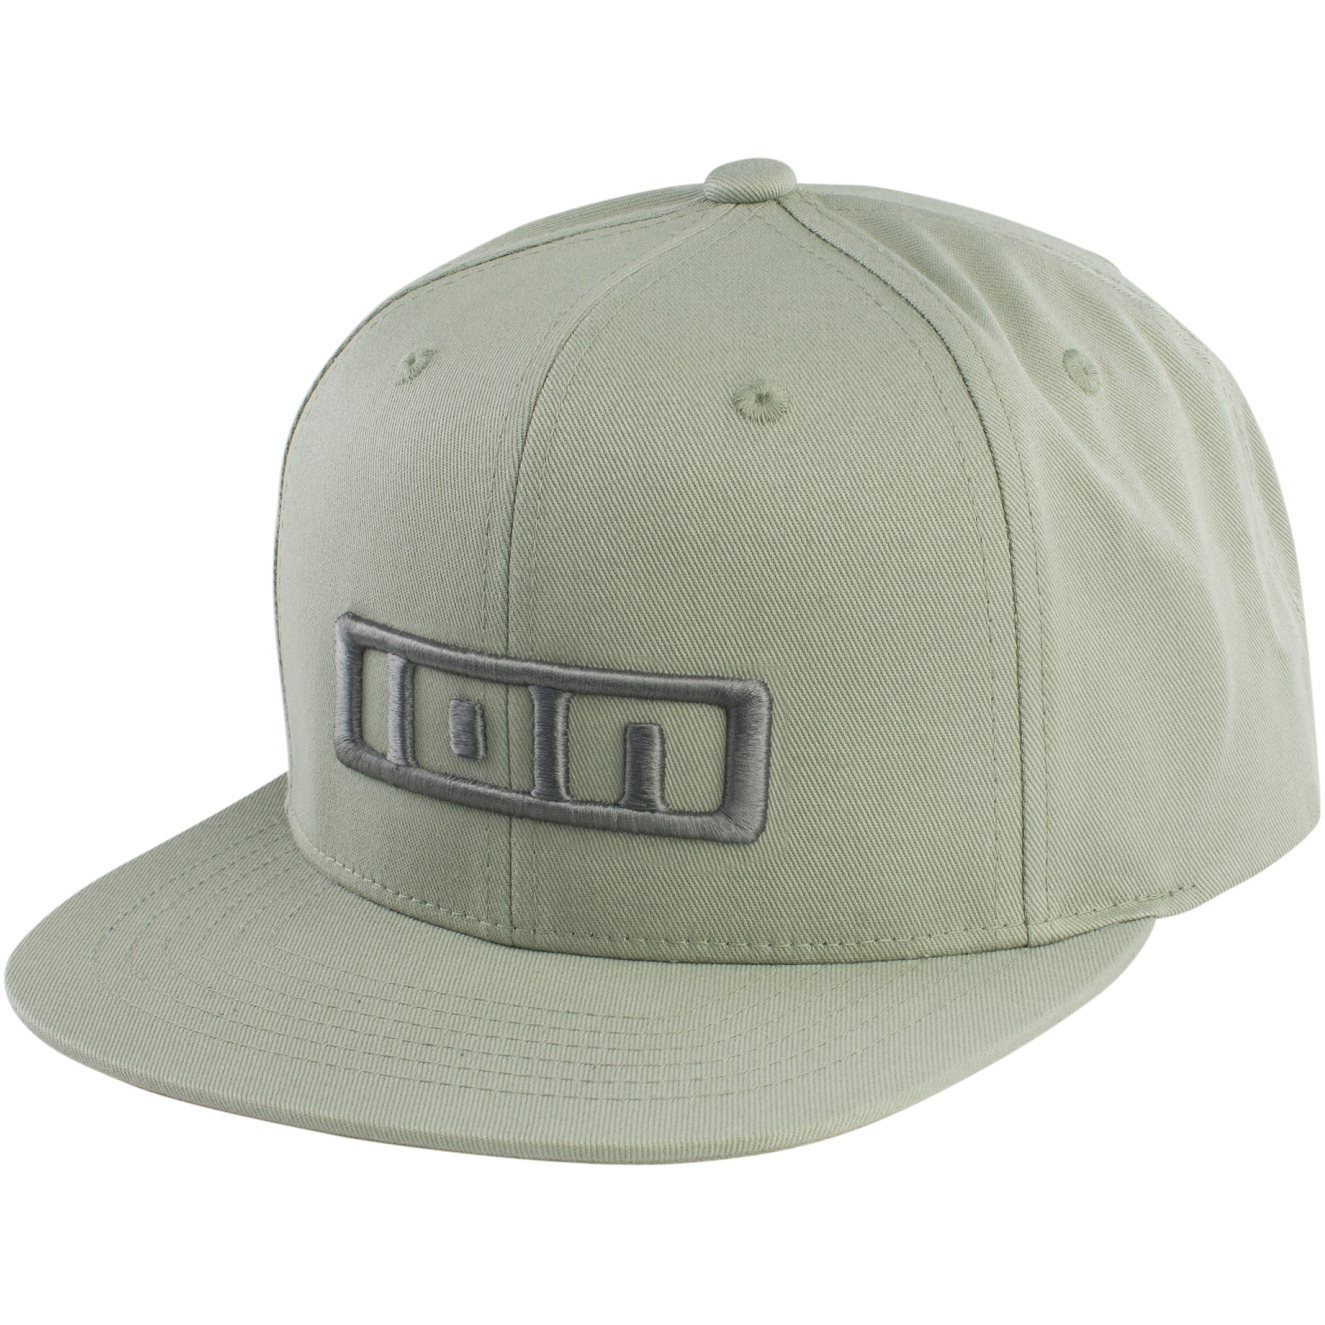 Picture of ION Cap ION Logo - Light Olive